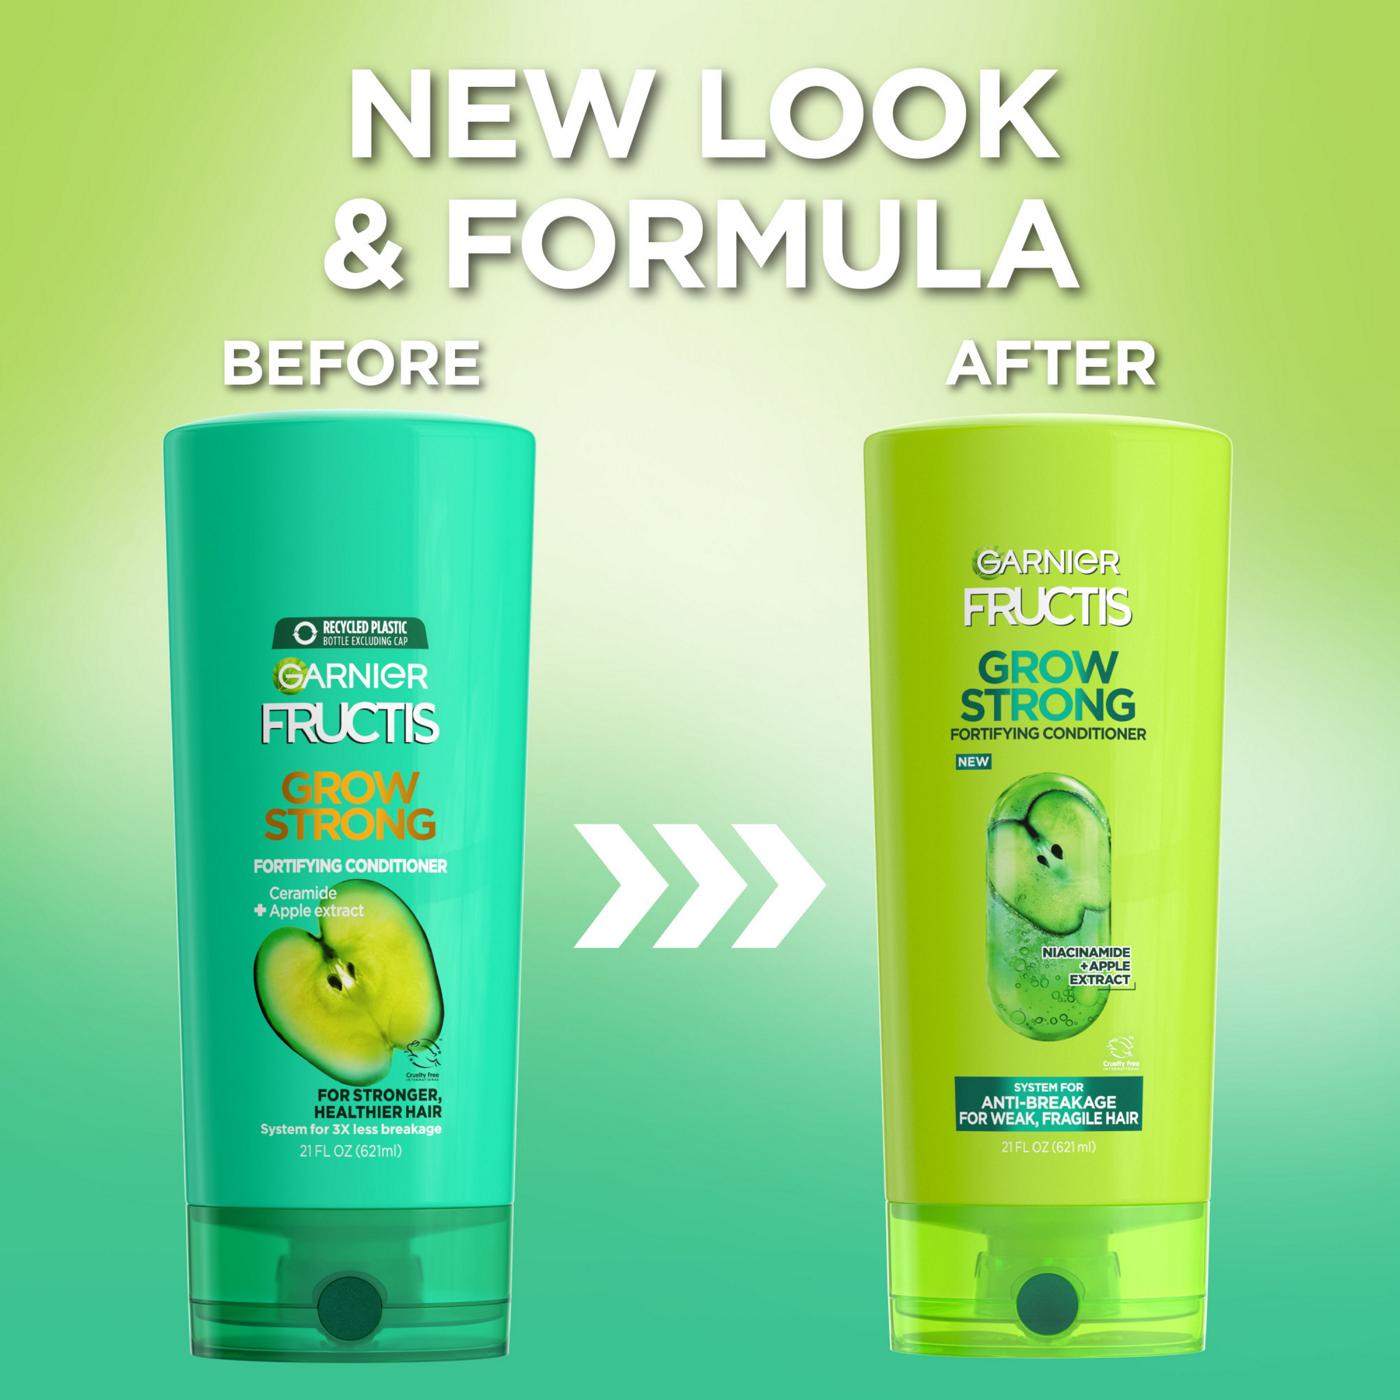 Garnier Fructis Grow Strong Fortifying Conditioner; image 7 of 9